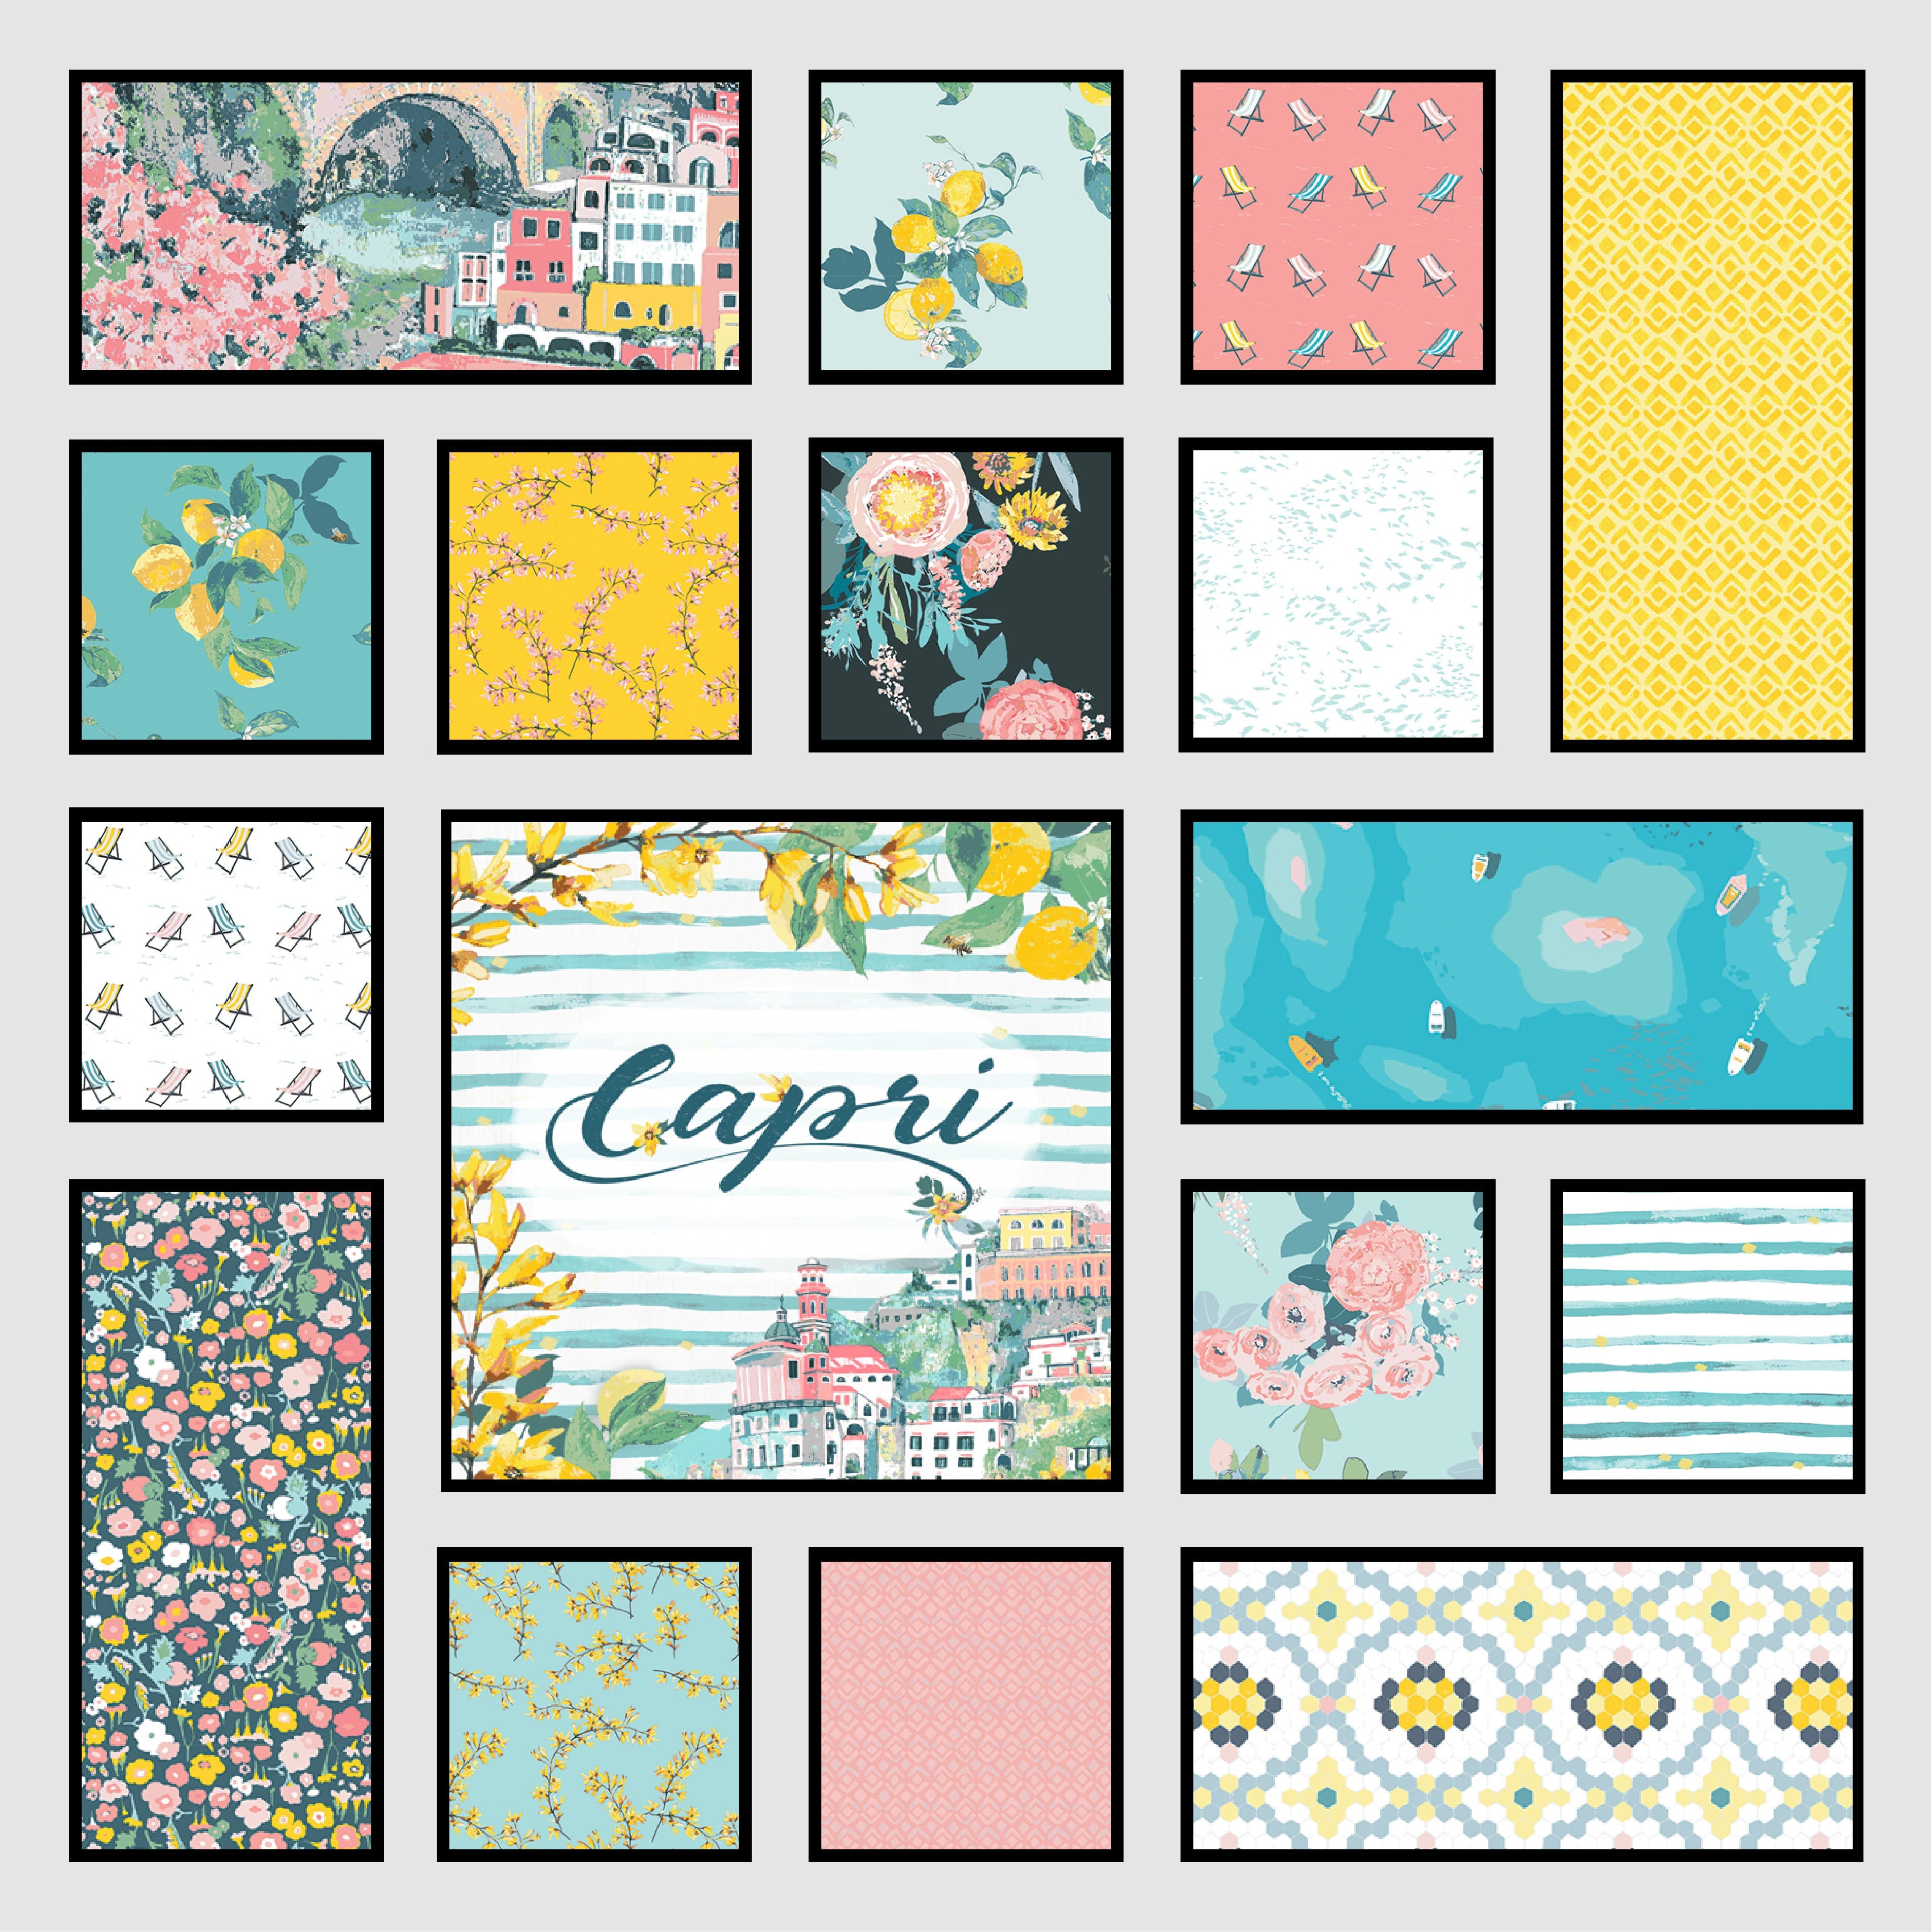 The image shows 16 fabric swatches in a range of vibrant, costal hues and prints.